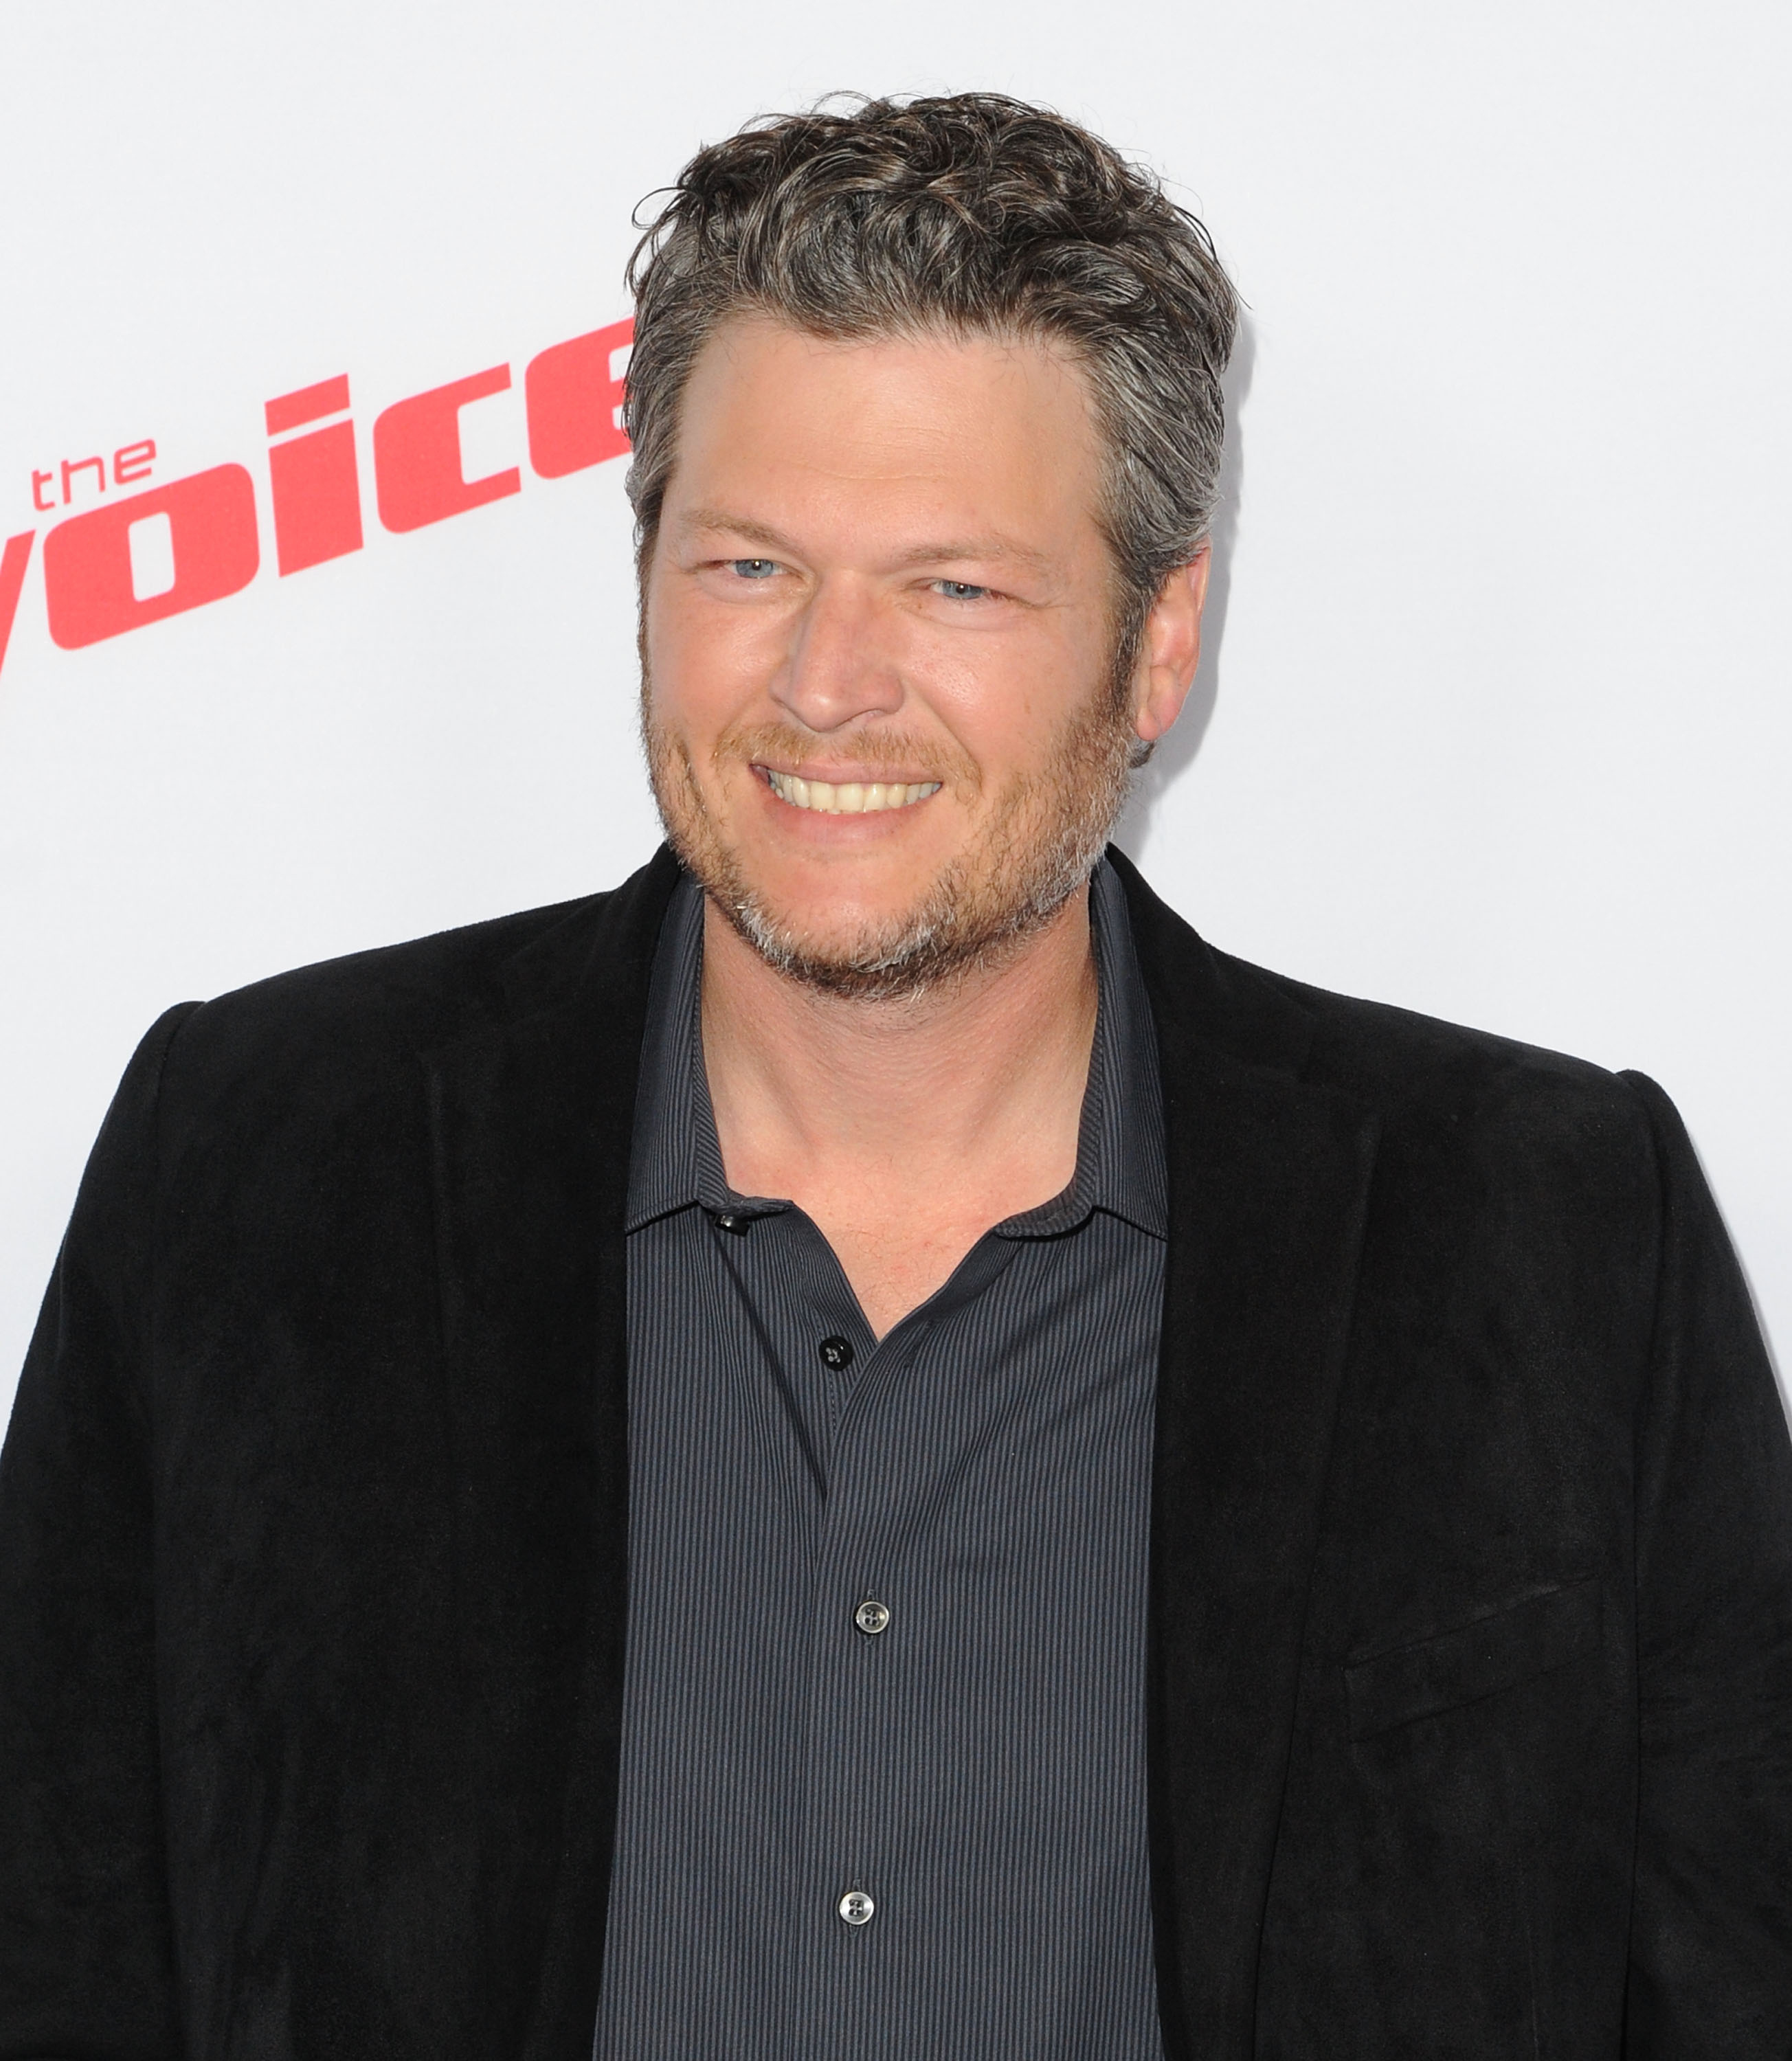 What Happened With Blake Shelton's First Marriage? It Ended After That ...